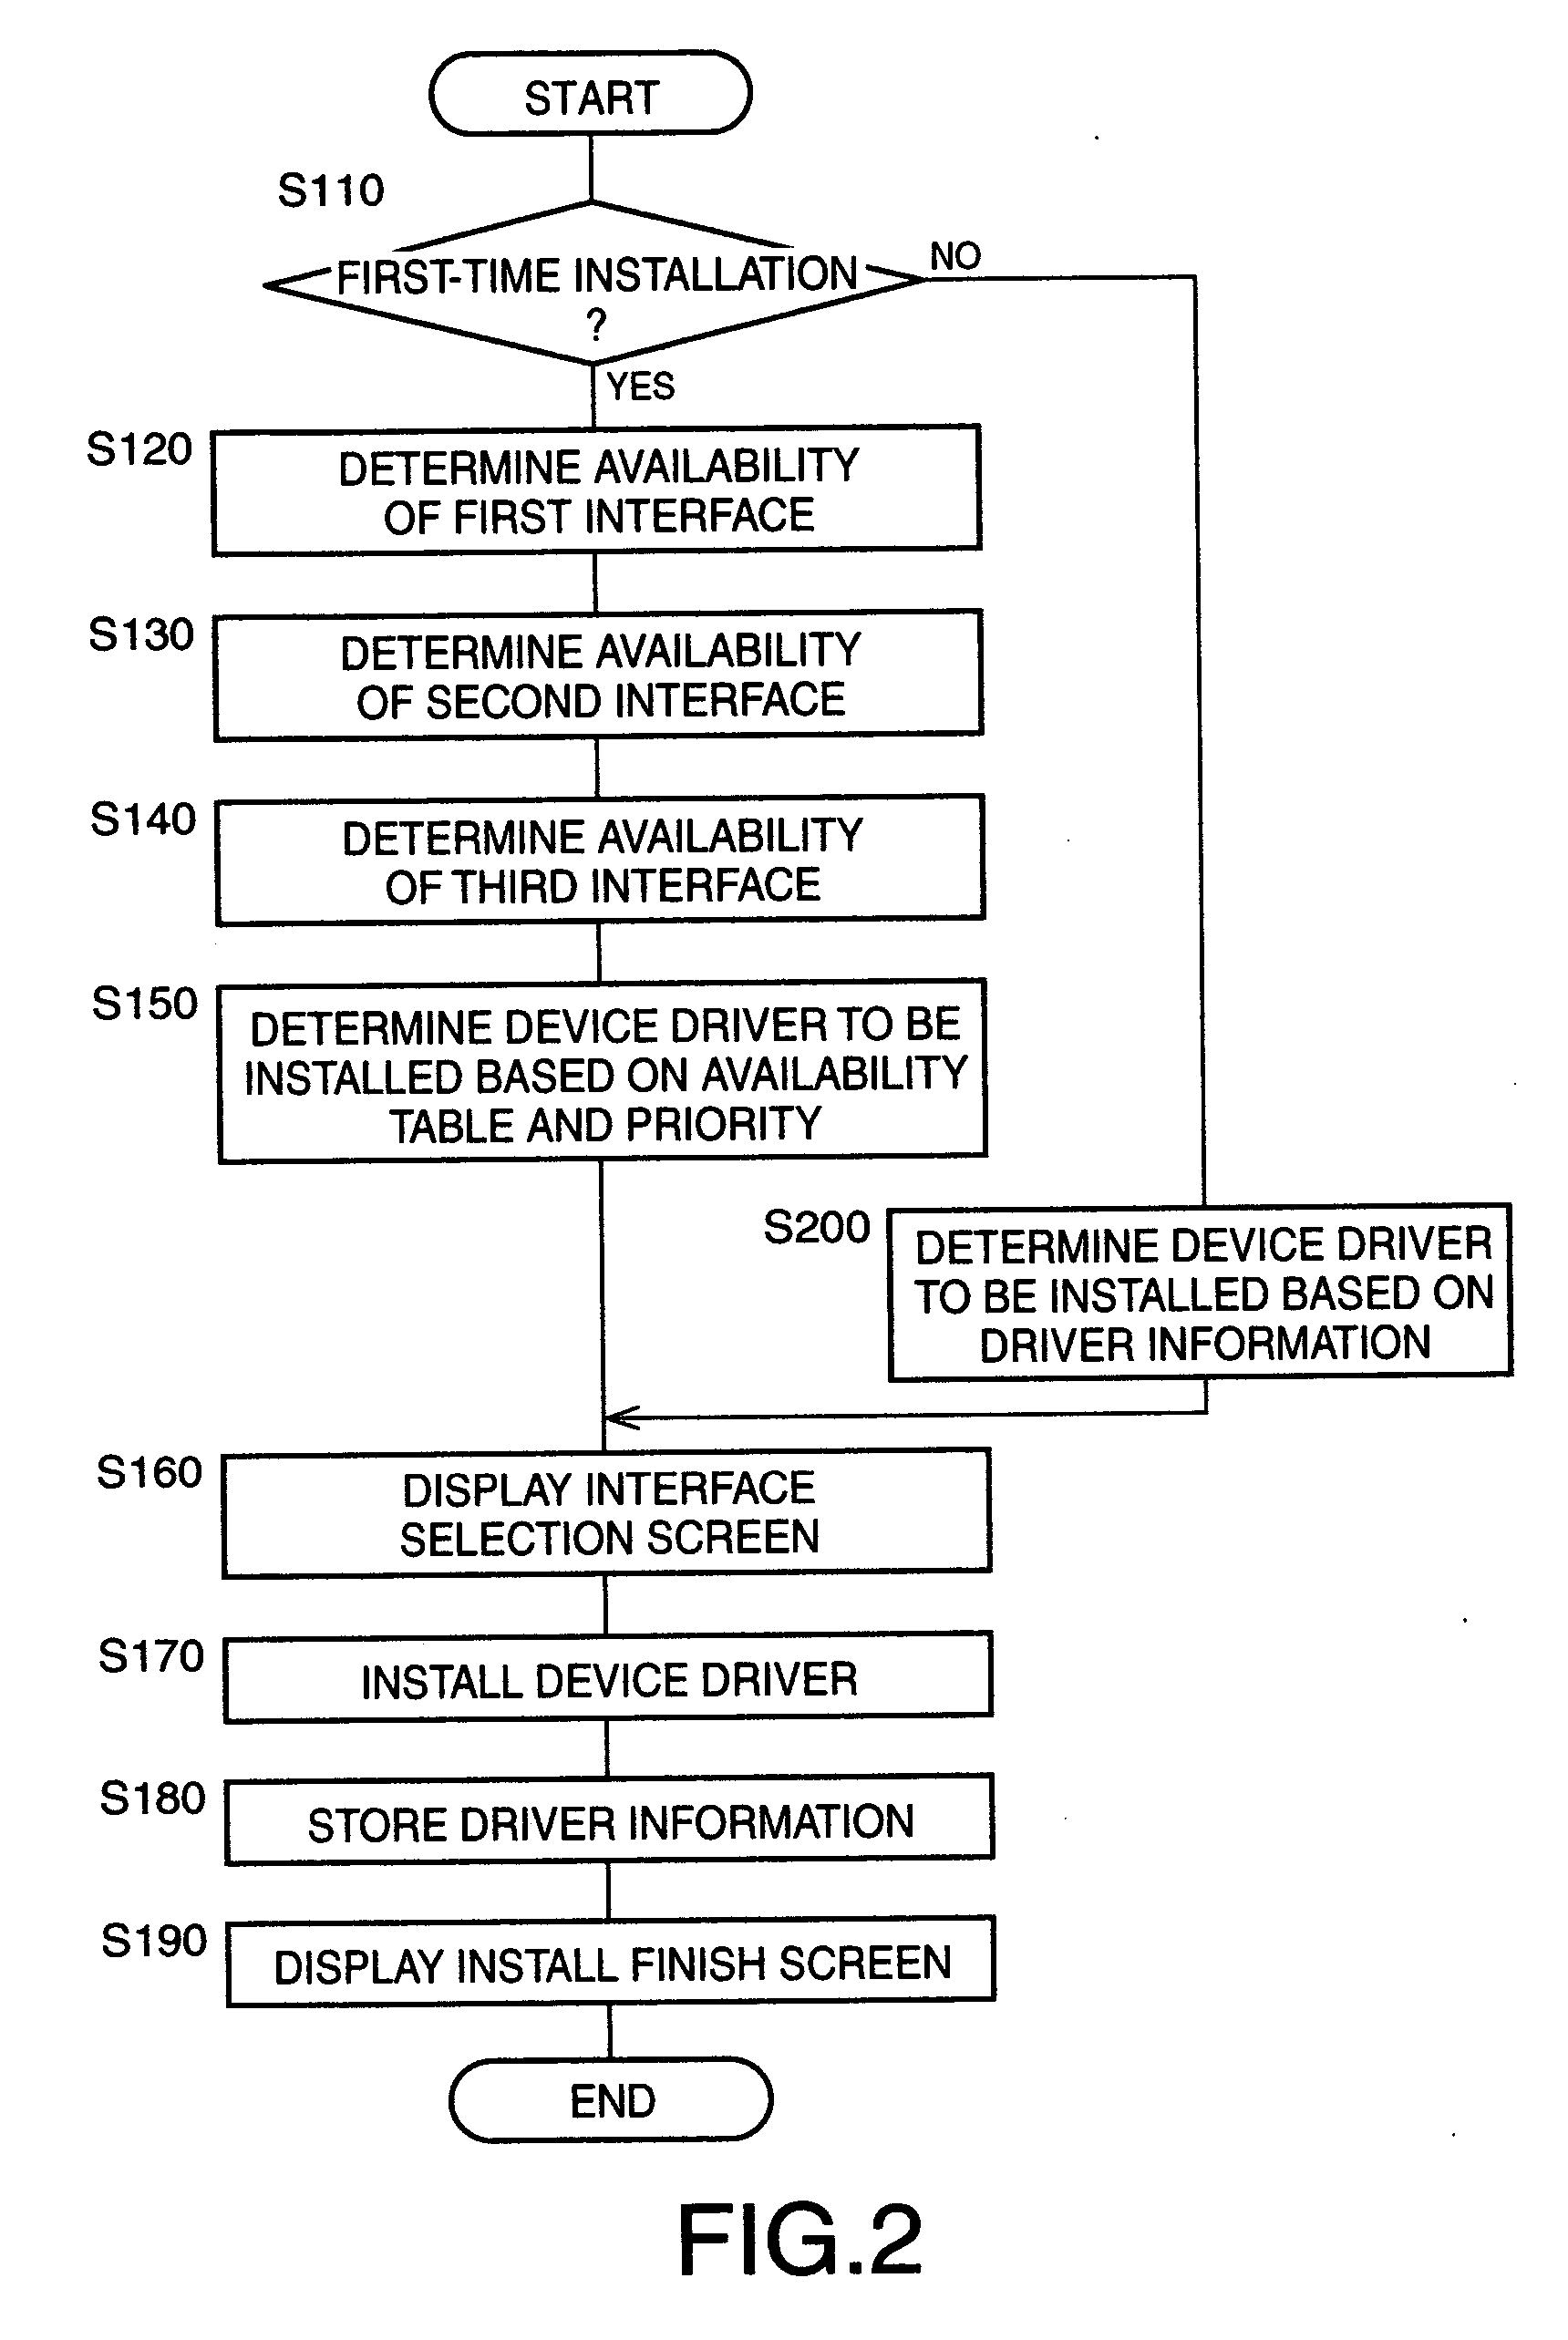 Computer-readable program product, process and apparatus for installing device driver